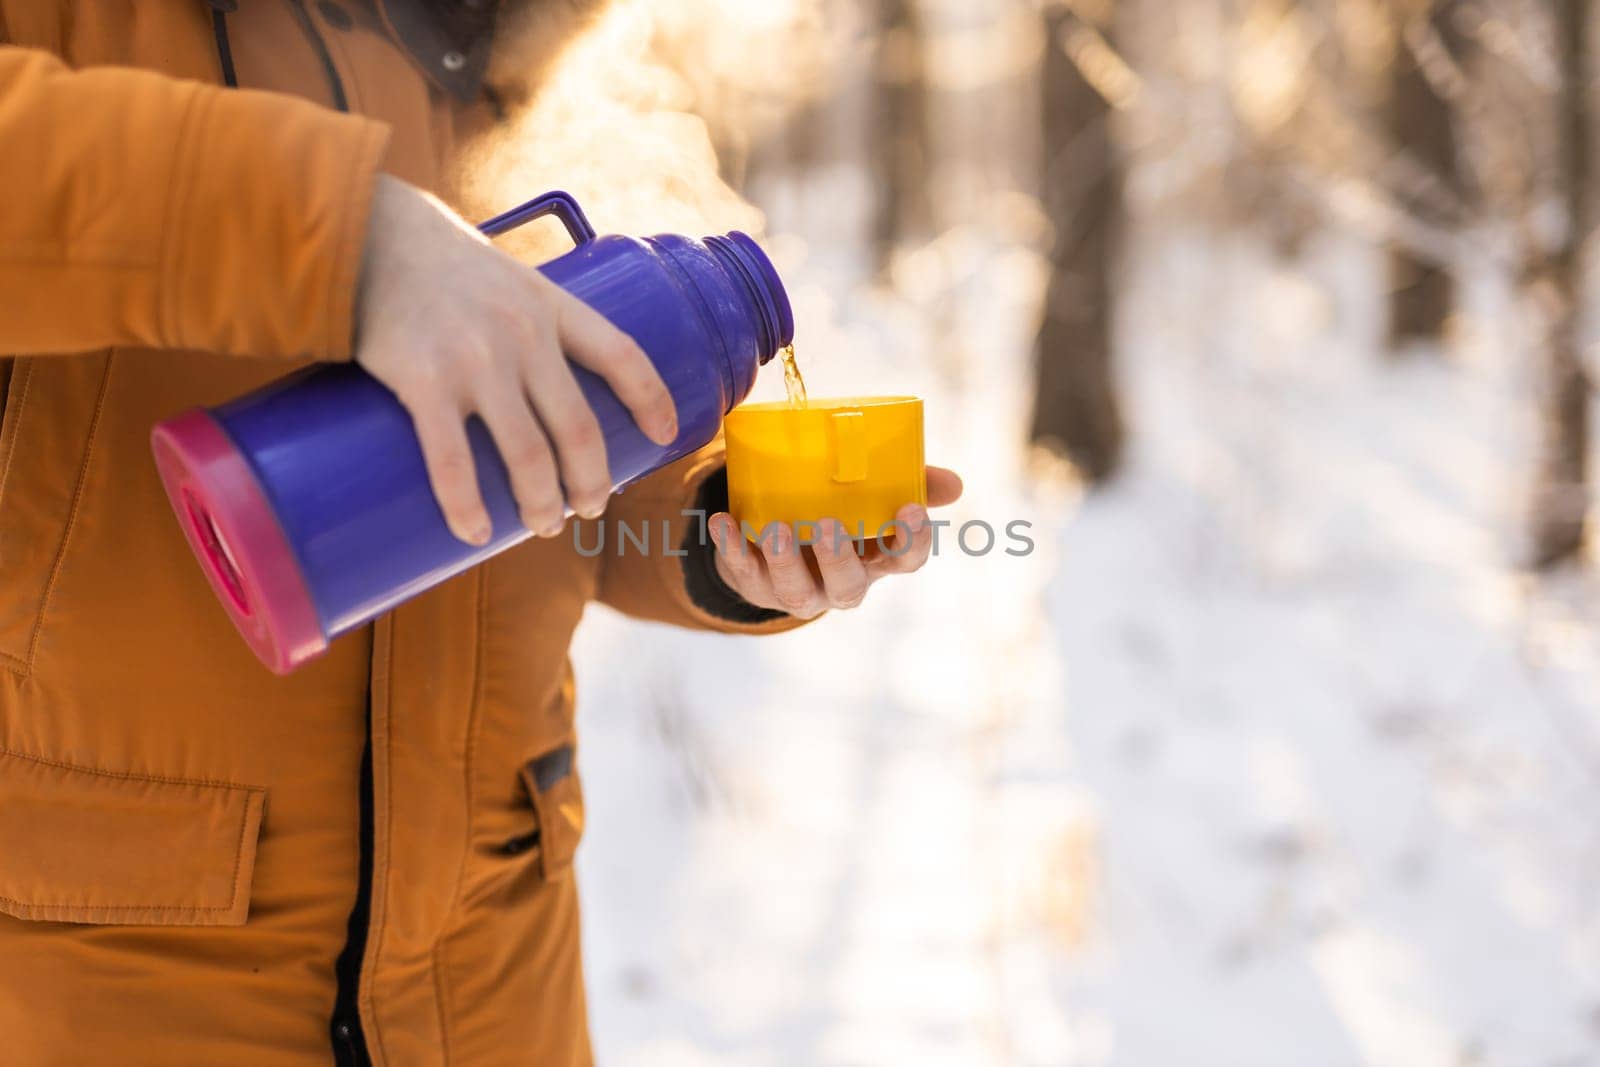 Man pours hot tea from a thermos into a snow walking in snowy frozen winter forest at sunset. Adventure, tourism and camping concept. Copy space and empty place for text advertising by Satura86